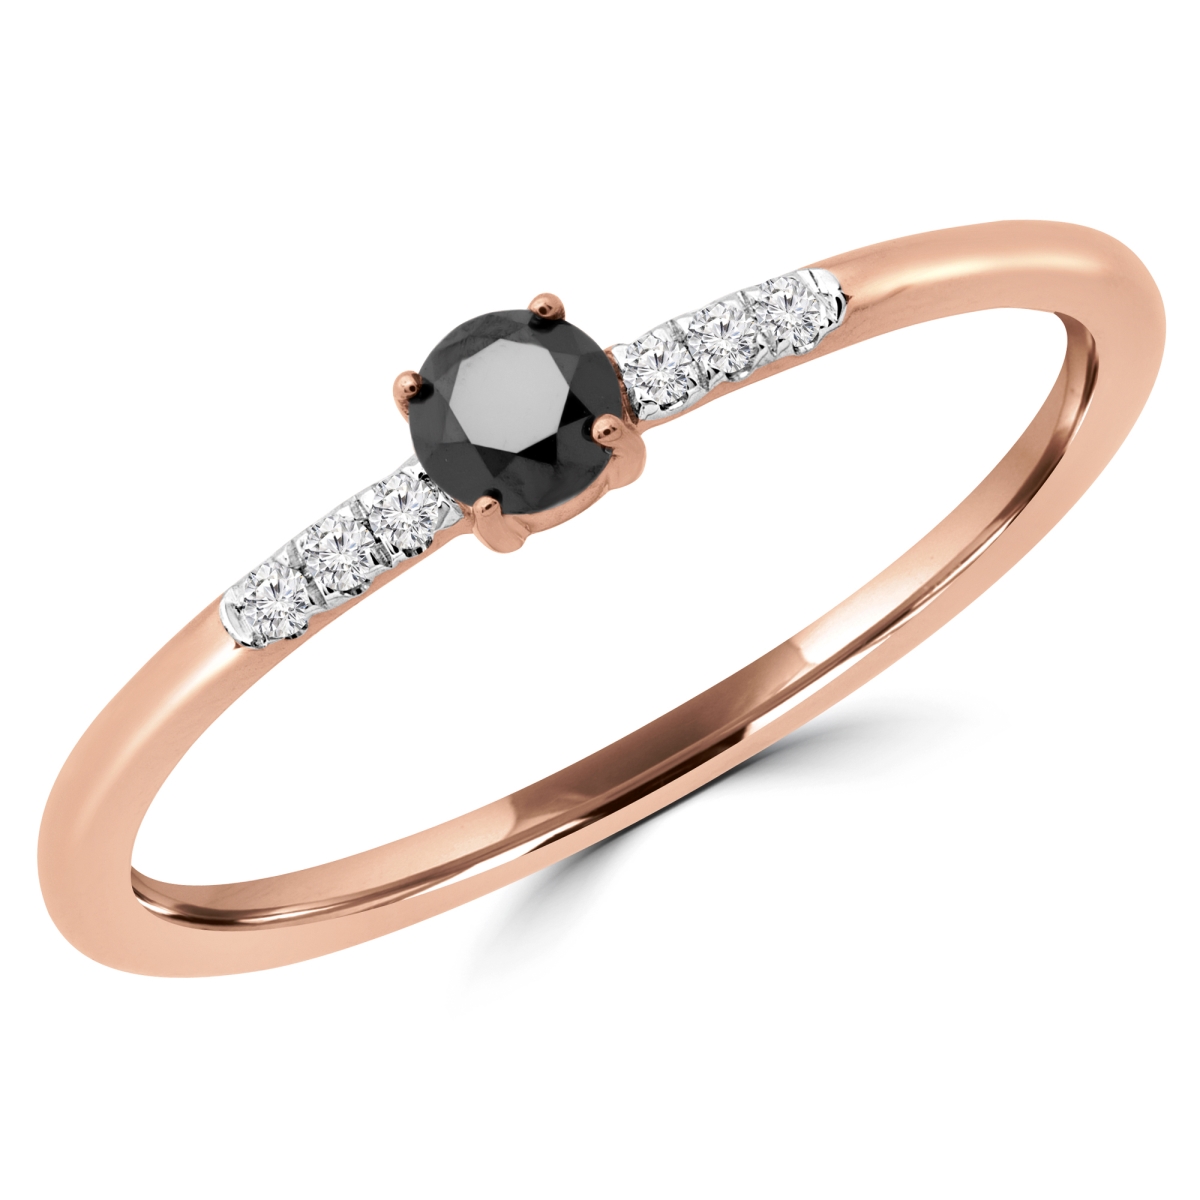 Picture of Majesty Diamonds MDR190079-8.5 0.16 CTW Round Black Diamond Bezel Set Cocktail Ring in 14K Rose Gold - Size 8.5